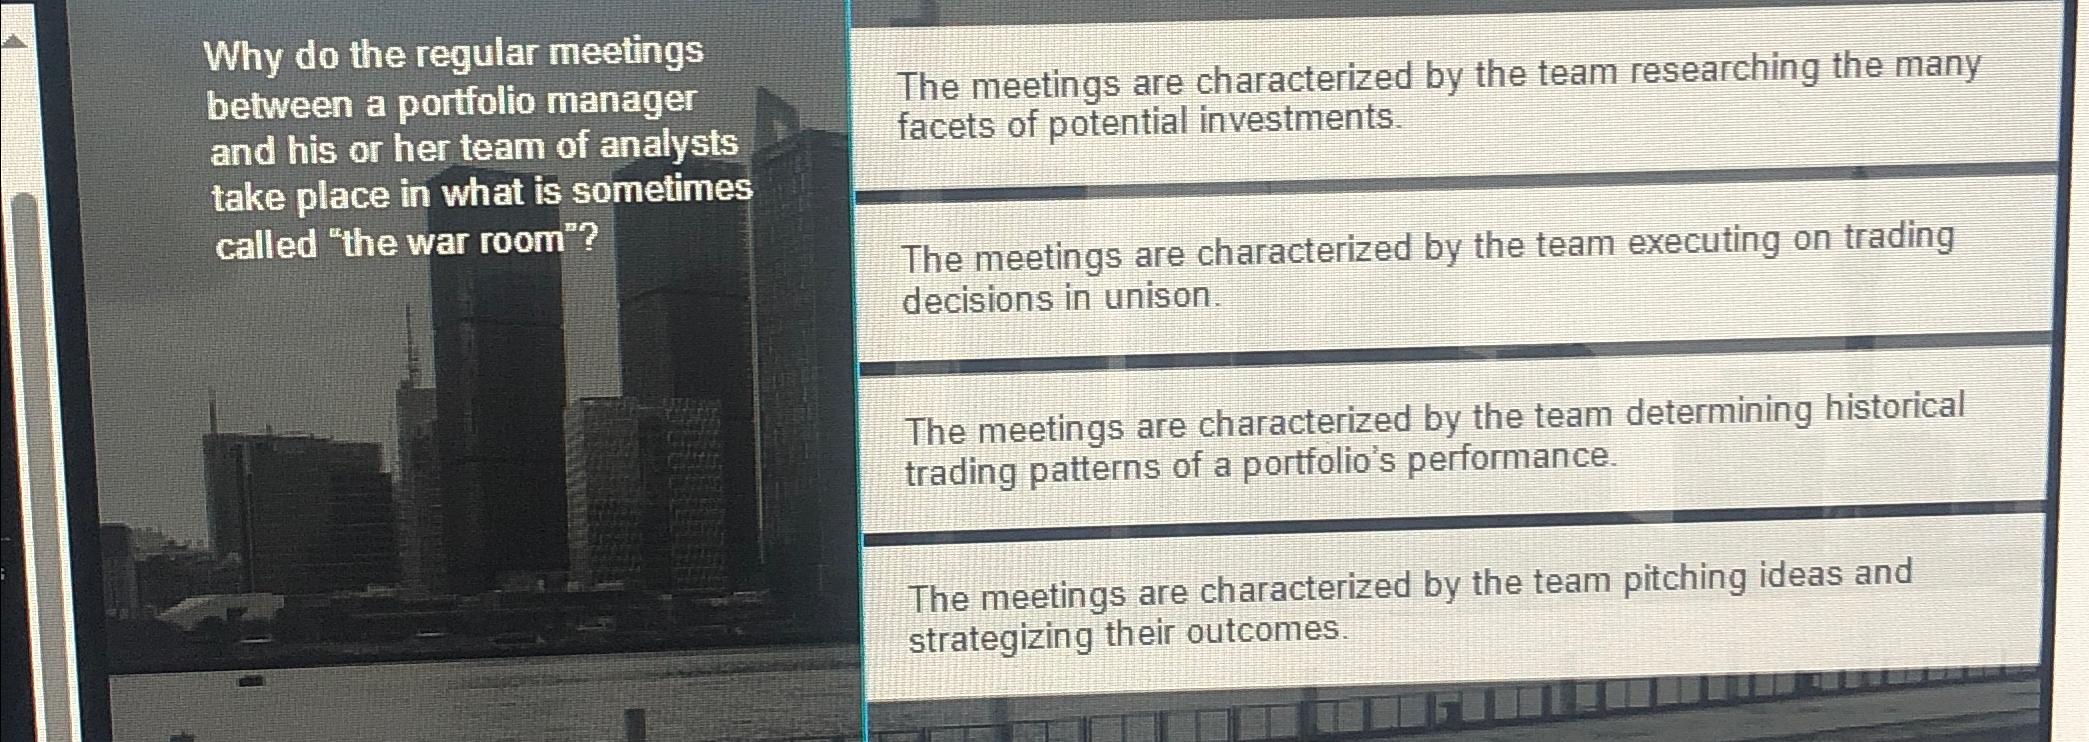 Why do the regular meetings between a portfolio manager and his or her team of analysts take place in what is